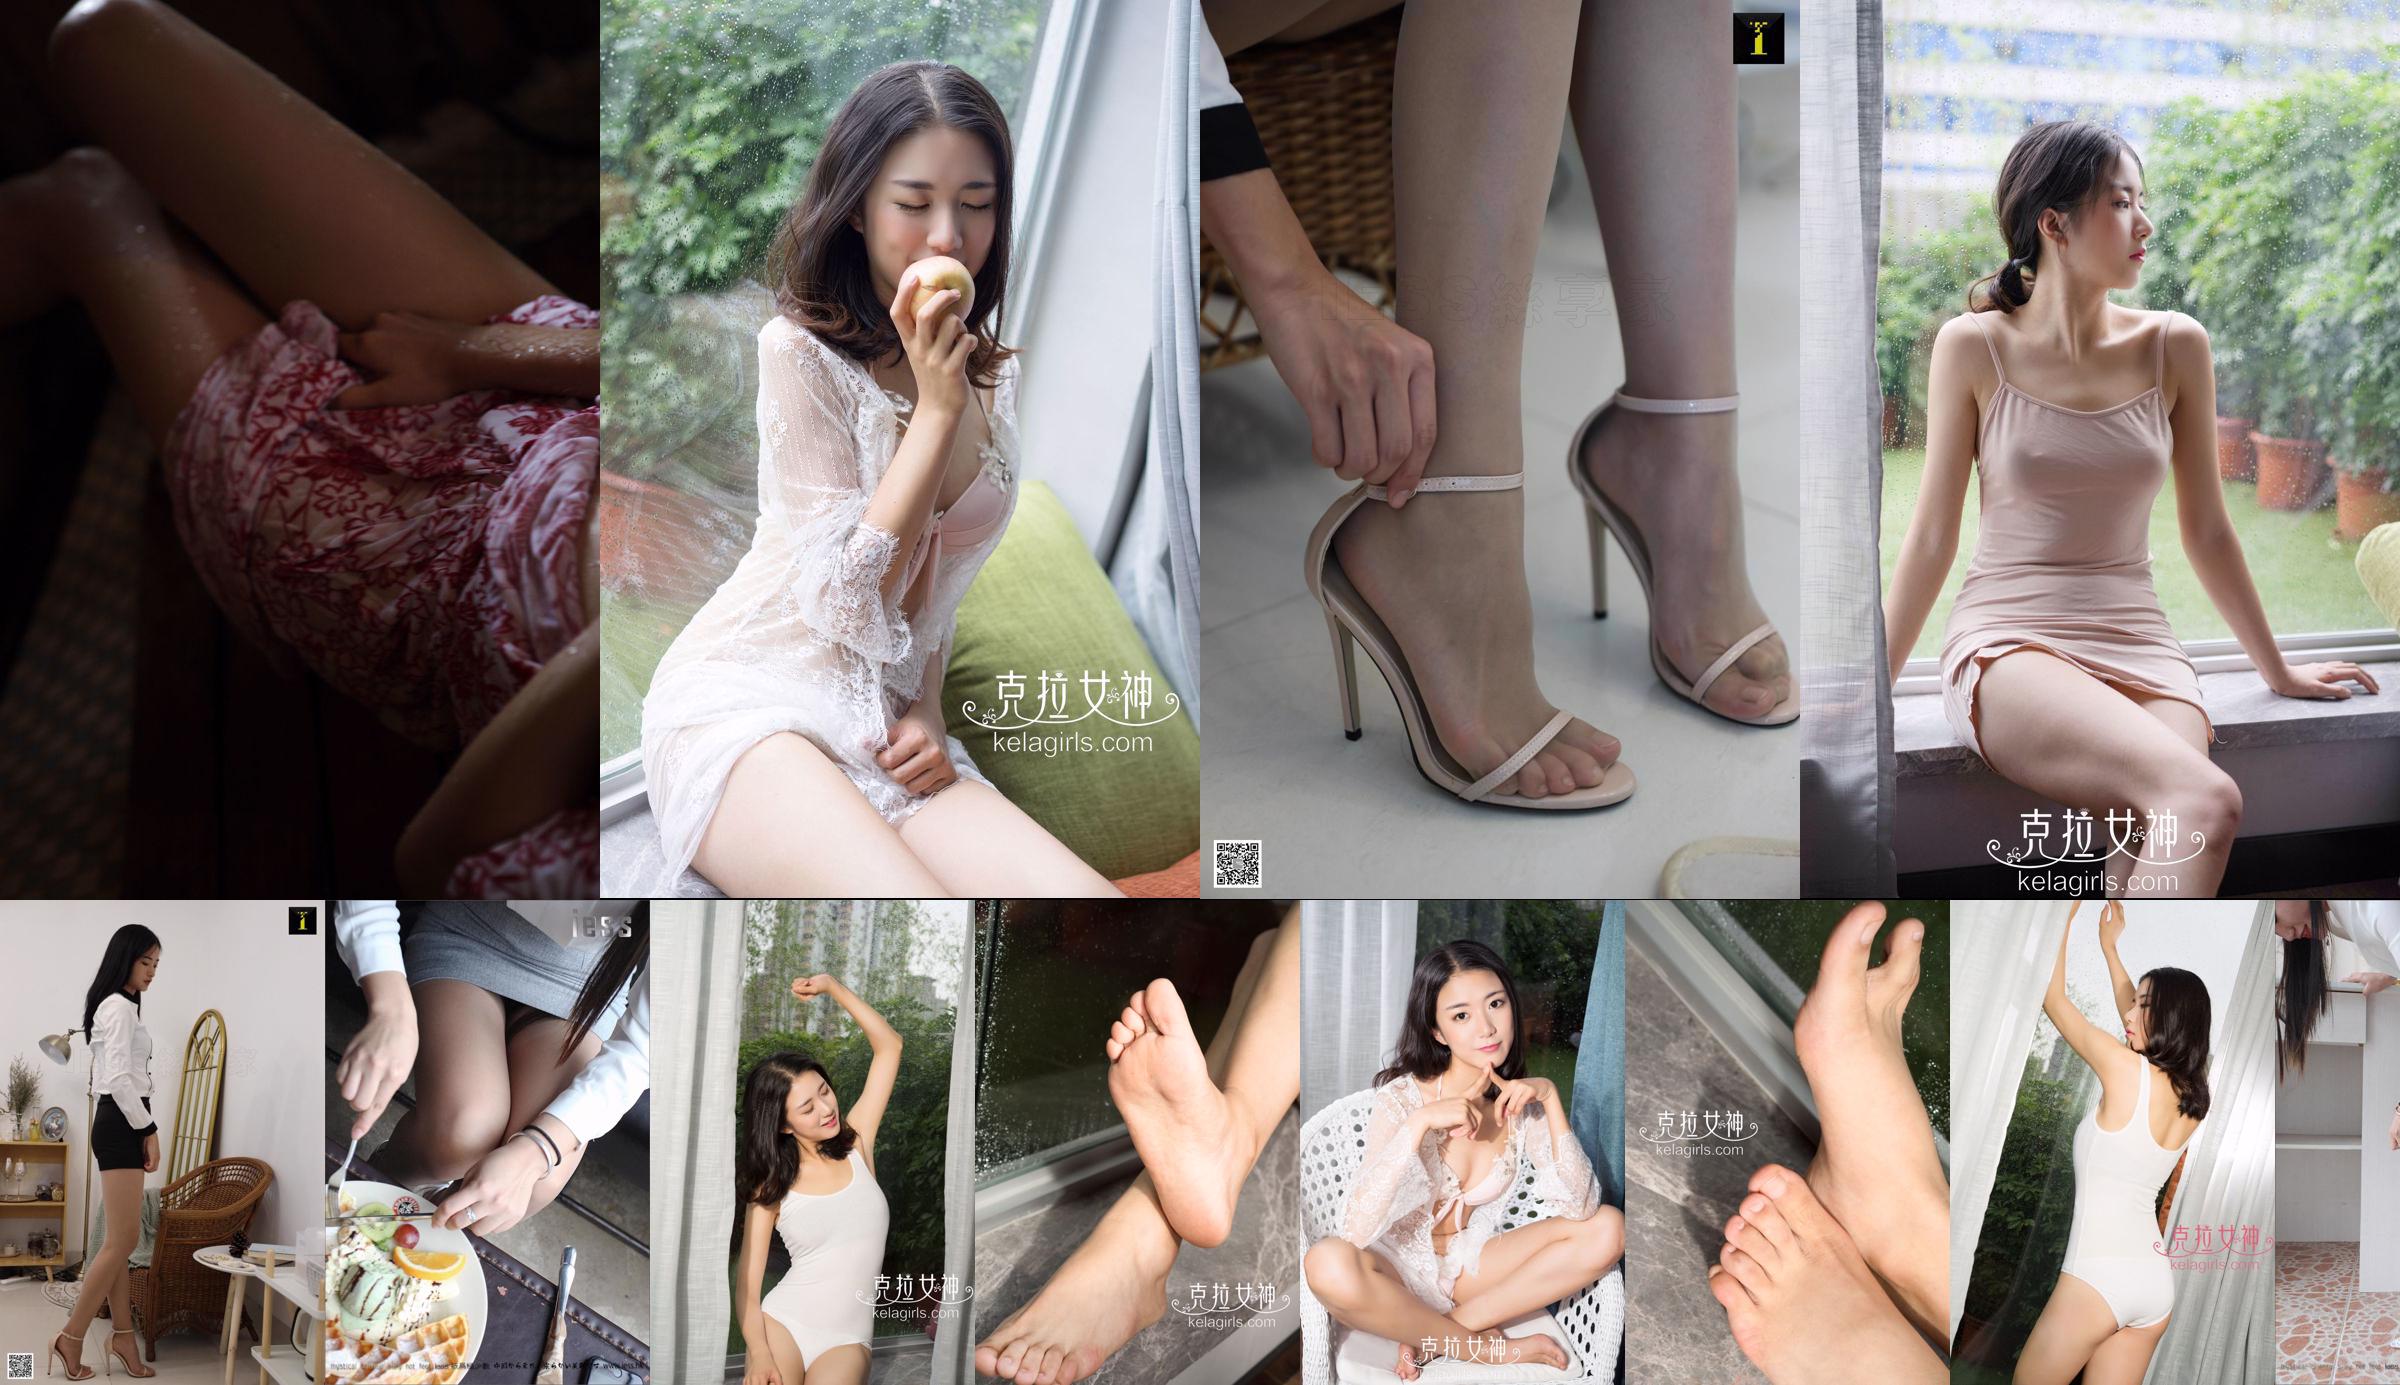 [Gentleman Photography] SS012 Ningning No.170e1f Page 8